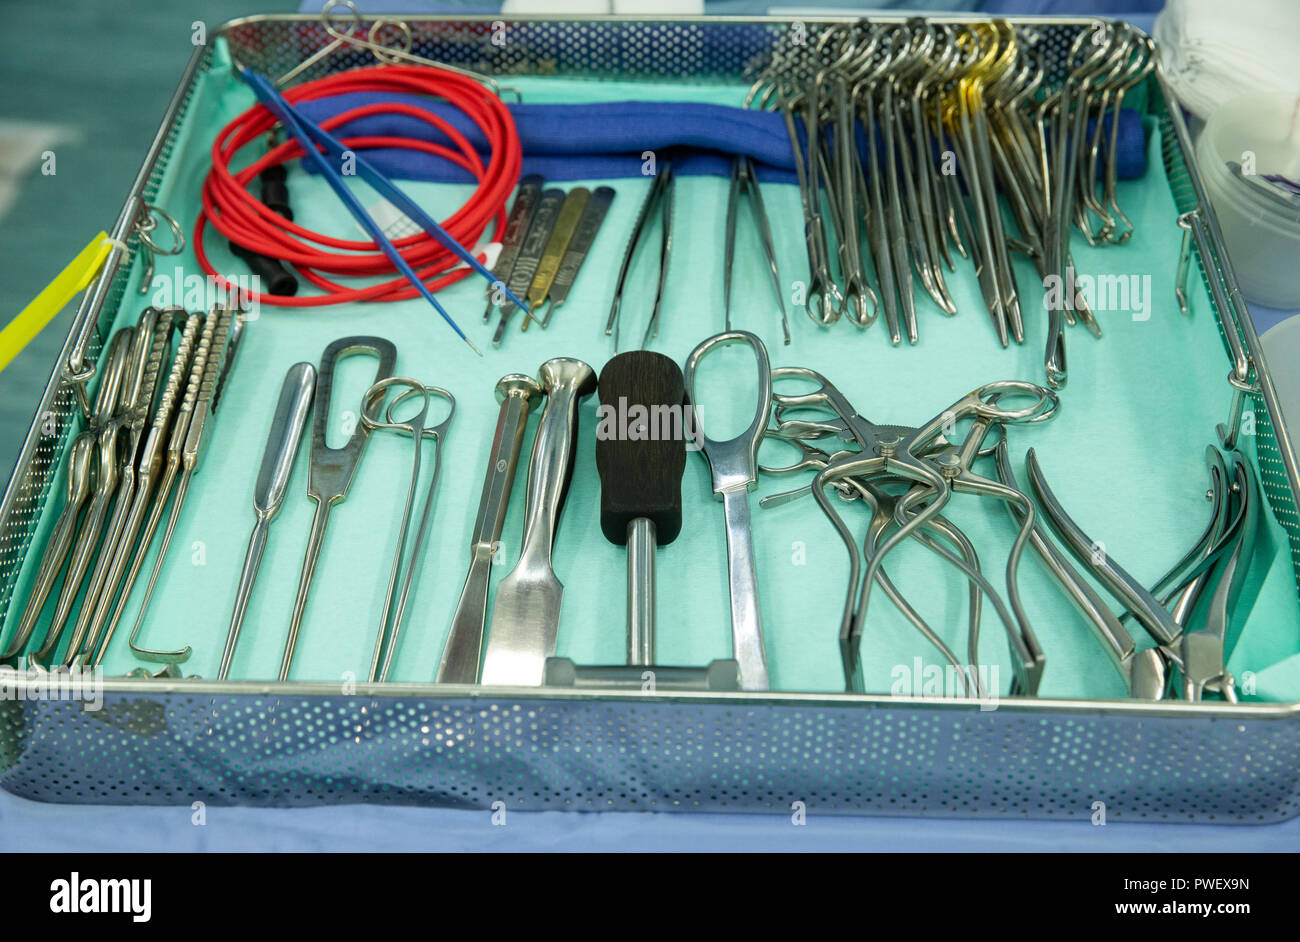 Medical Instruments or Surgical Tools in an Operating Theatre Setup Stock  Image - Image of hospital, clamp: 113484557